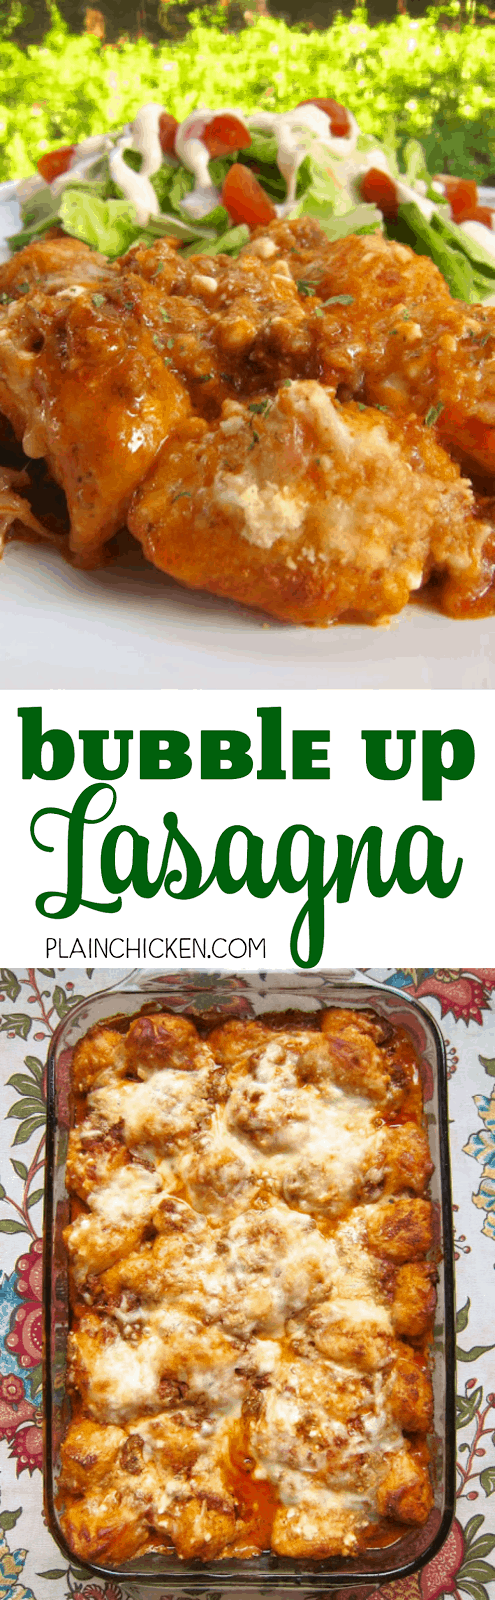 Bubble Up Lasagna - Italian sausage, spaghetti sauce, 3 cheeses tossed with chopped refrigerated biscuits - all the flavors of lasagna without all the work! I literally wanted to lick my plate! Precook the sausage and this dish is ready before the oven can preheat!